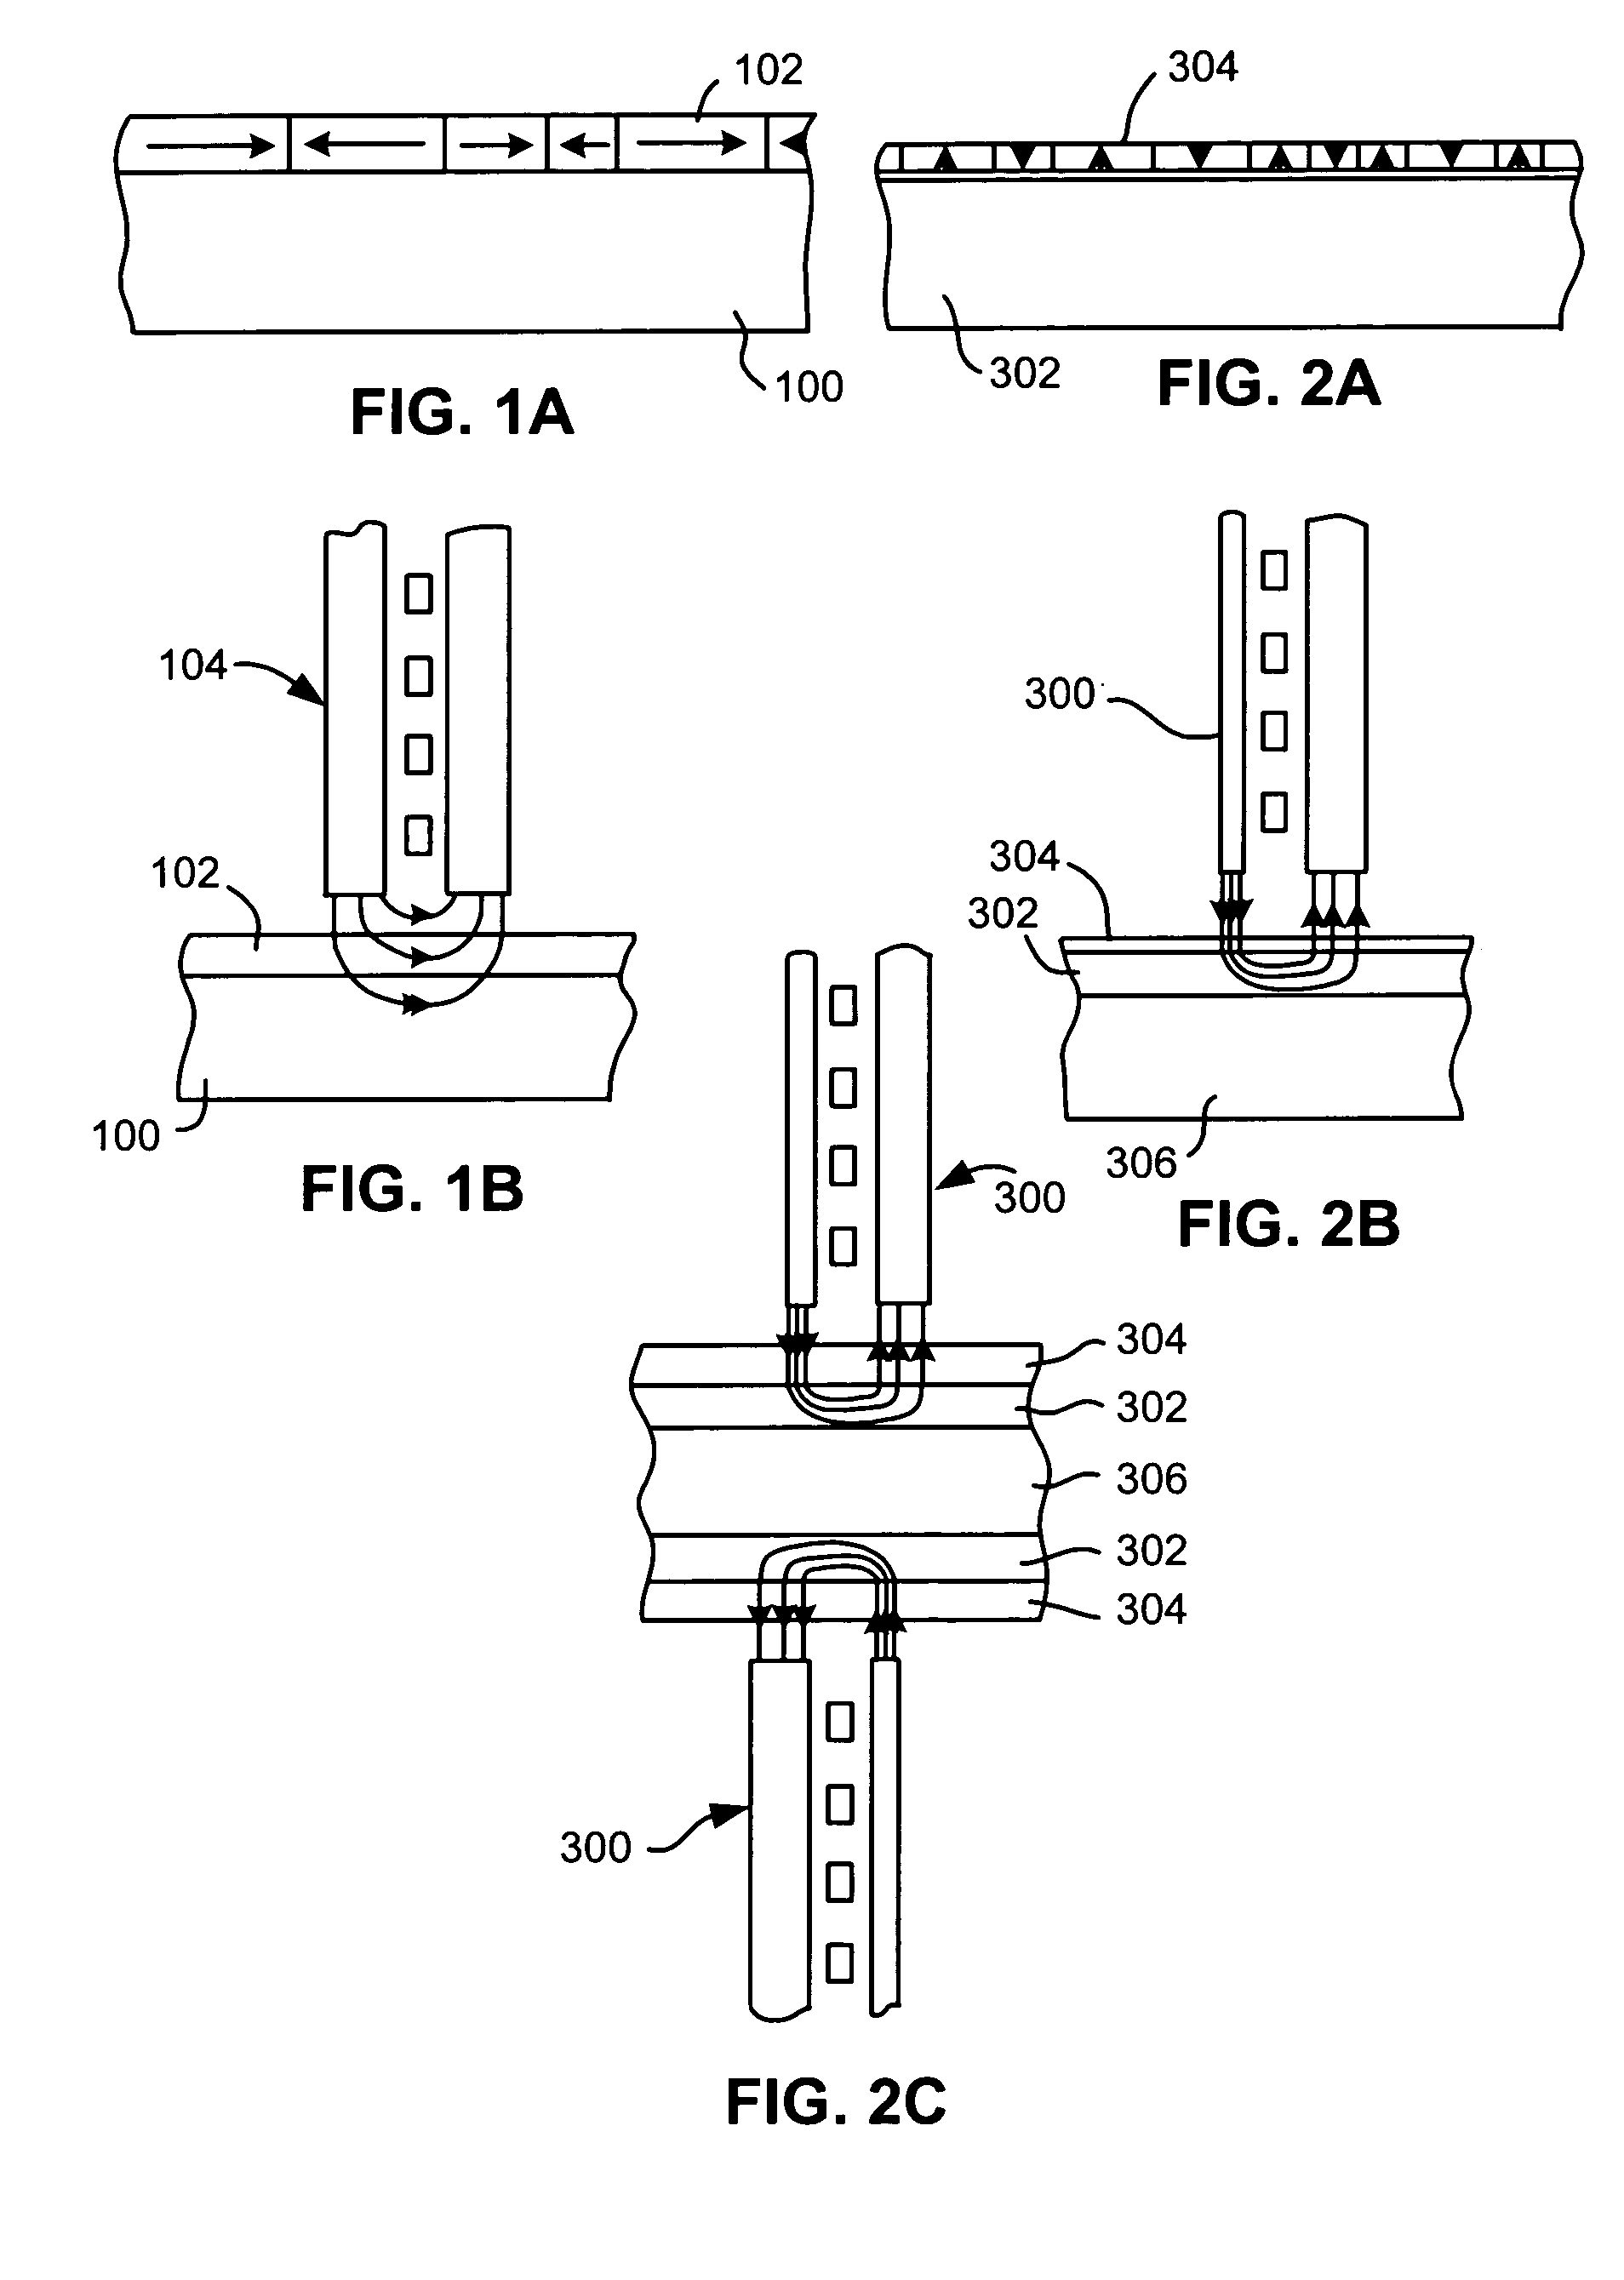 Method for forming a write head having air bearing surface (ABS)